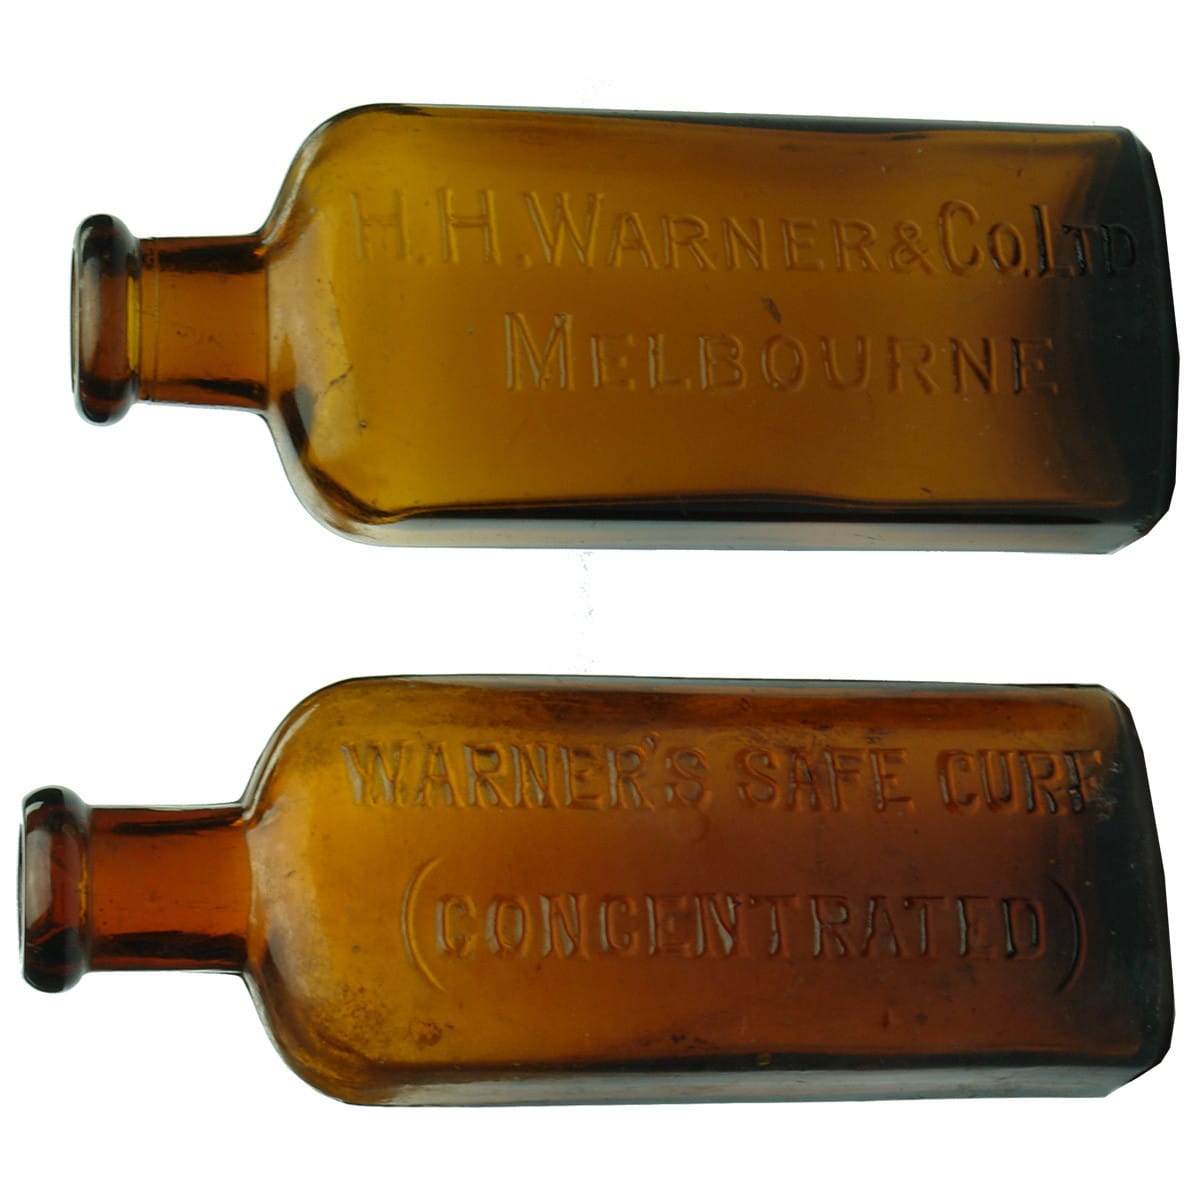 Pair of Small Warners: Warner's Safe Cure Concentrated and H. H. Warner & Co Ltd Melbourne.